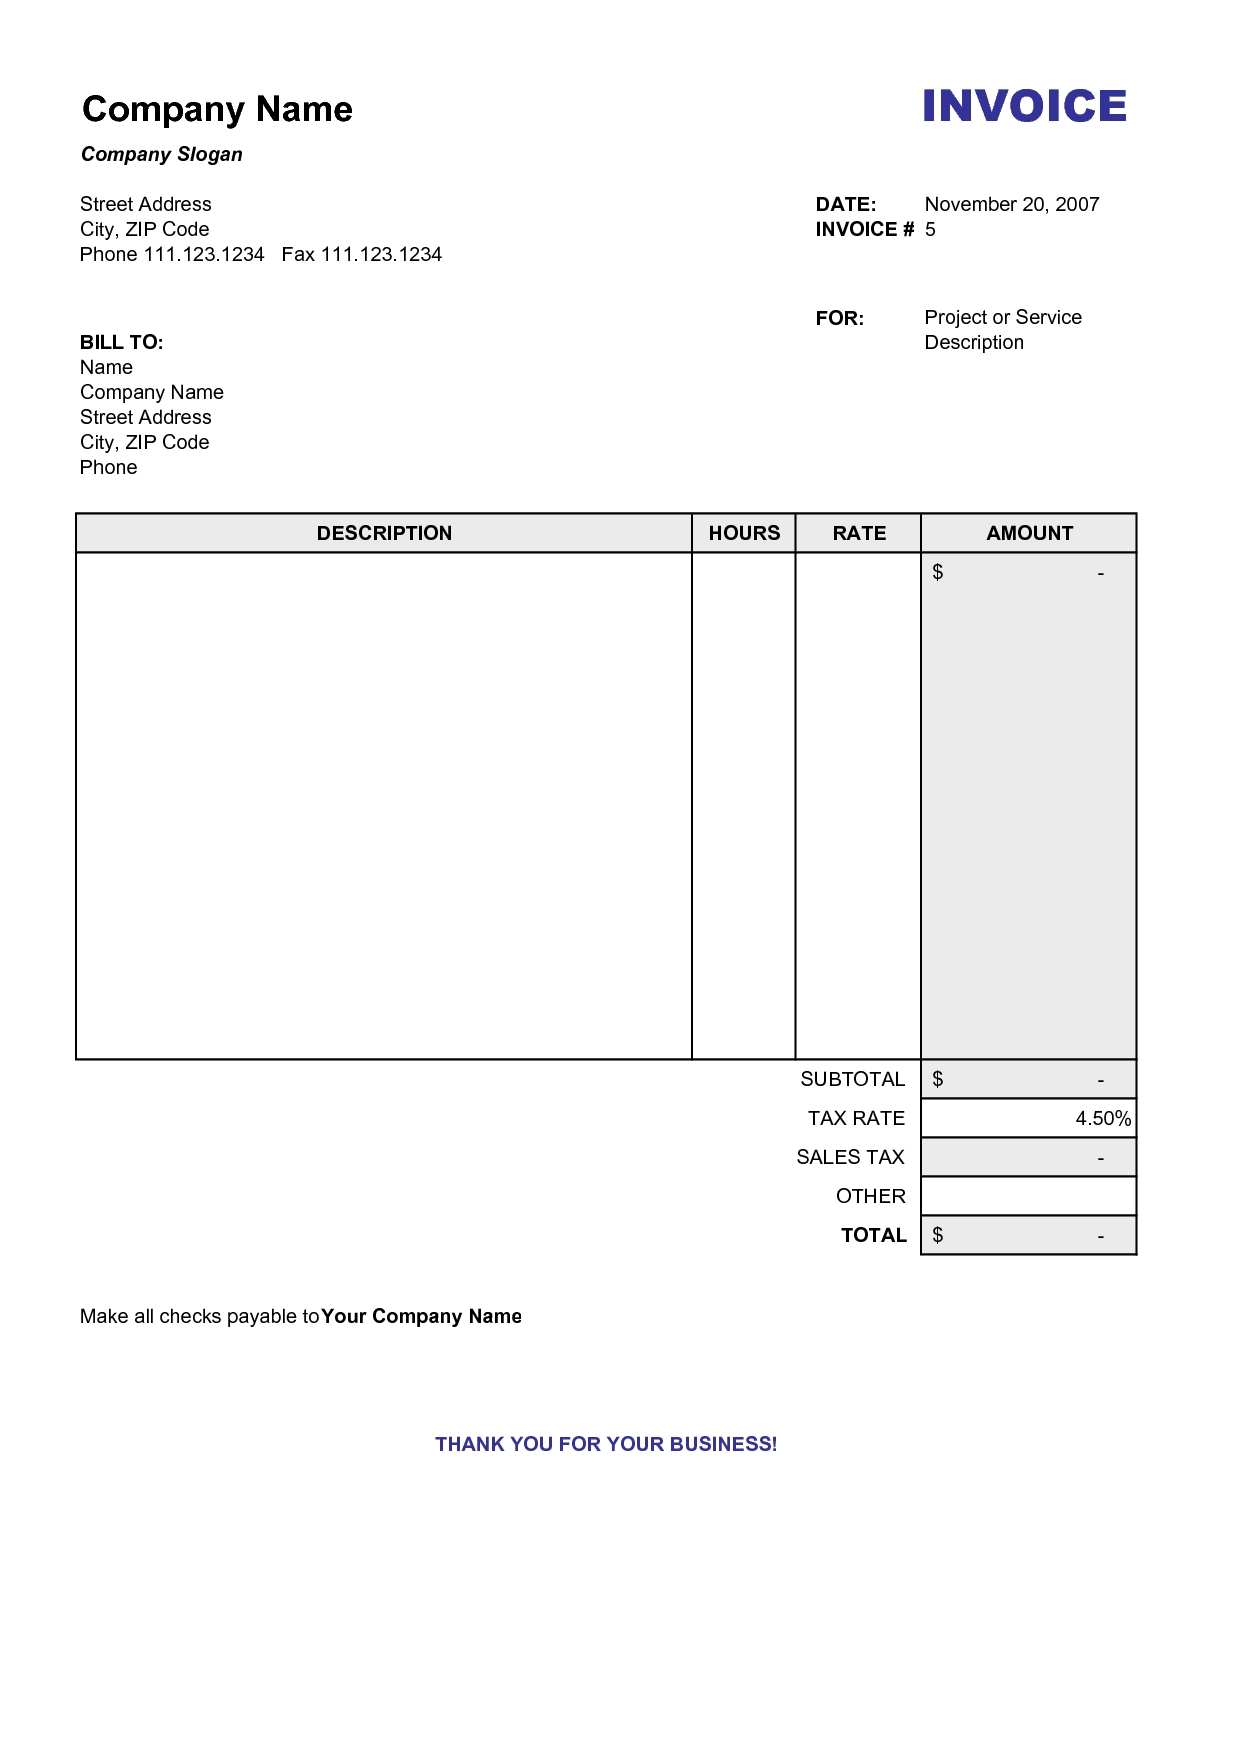 blank billing invoice scope of work template invoice blank bill invoice images